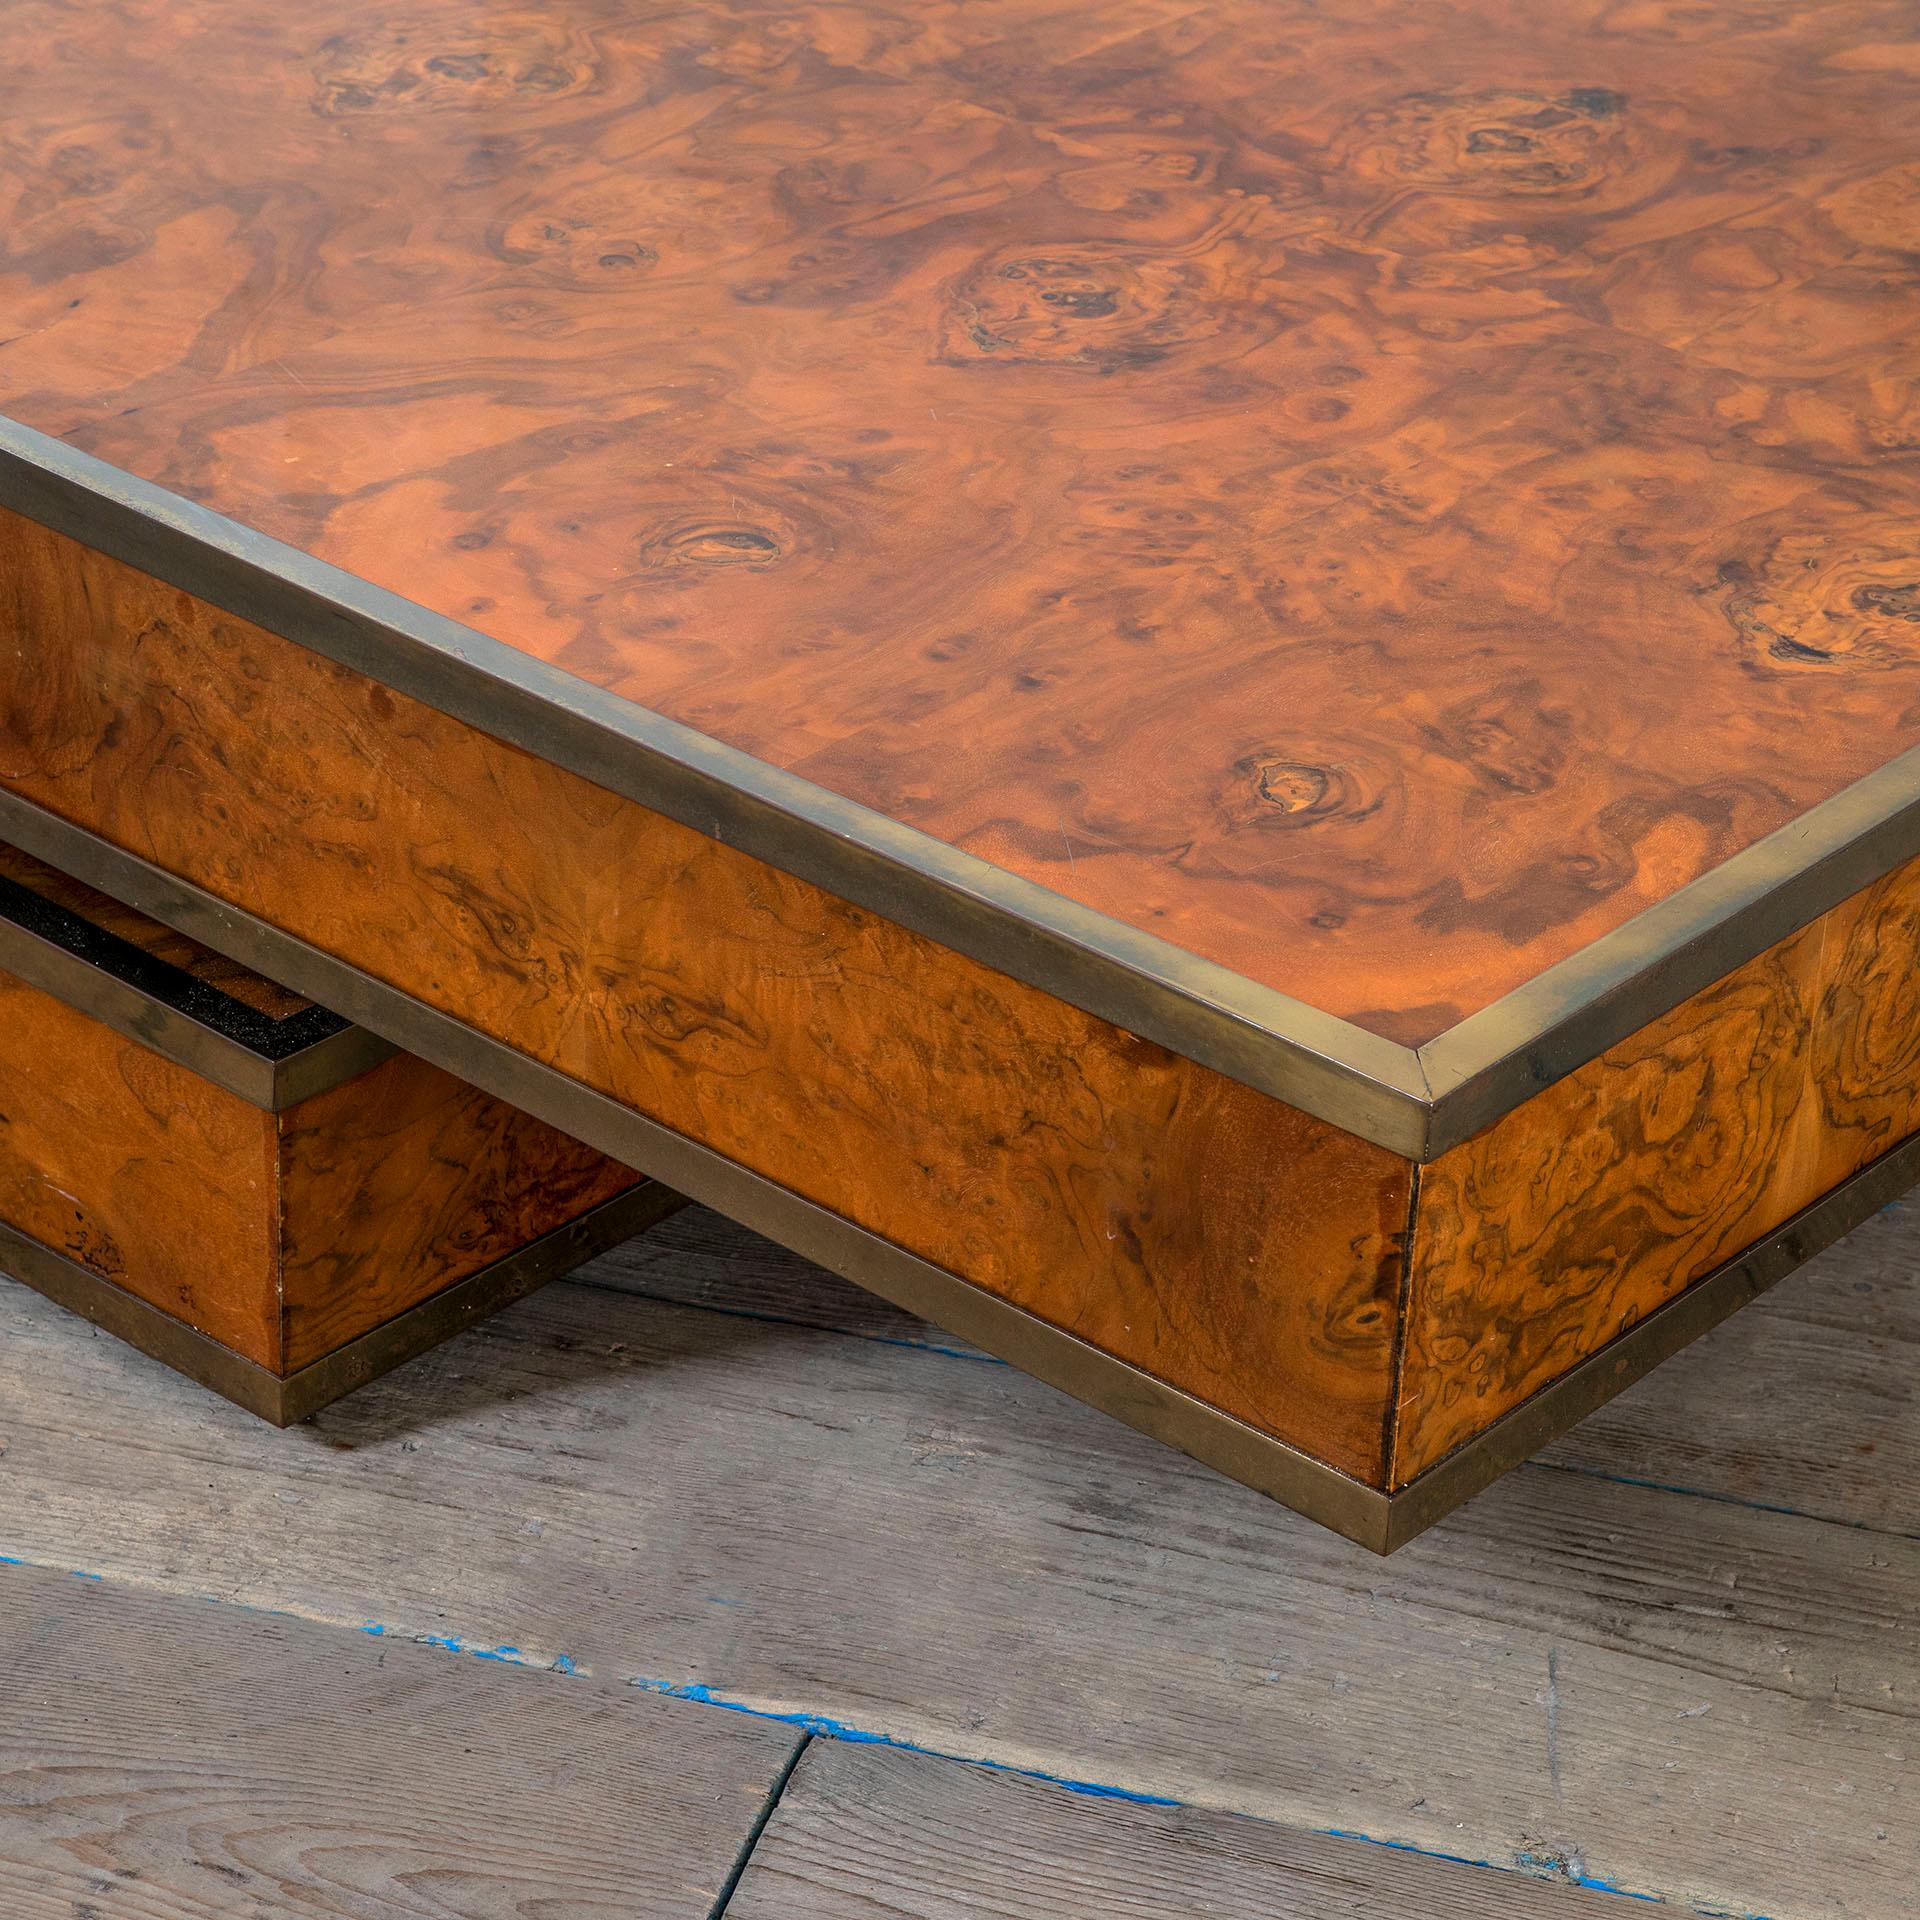 Italian 20th Century Low Table with Sliding Top in the style of Gabriella Crespi '70s